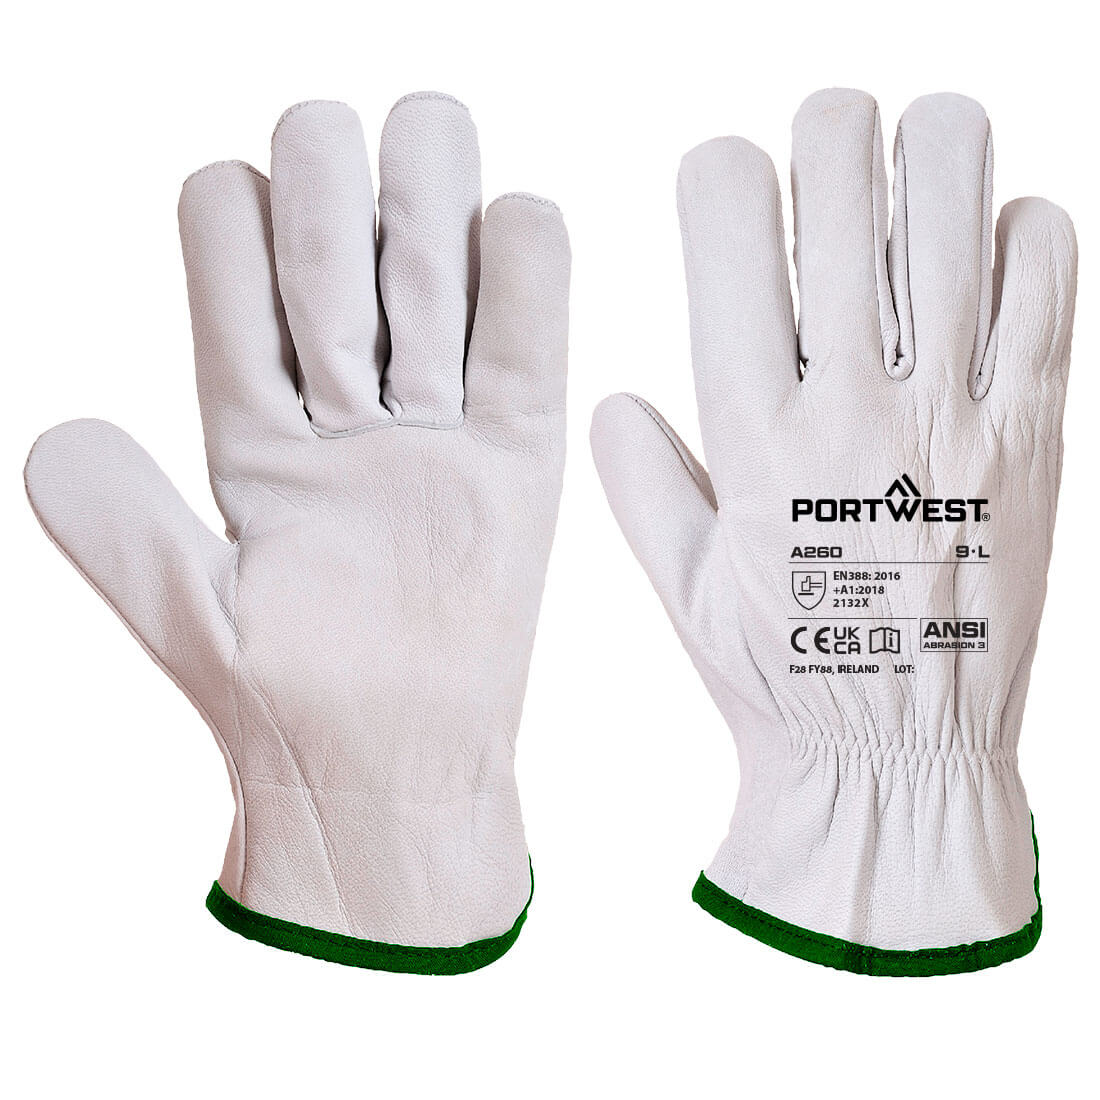 Portwest Oves Driver Glove (A260)